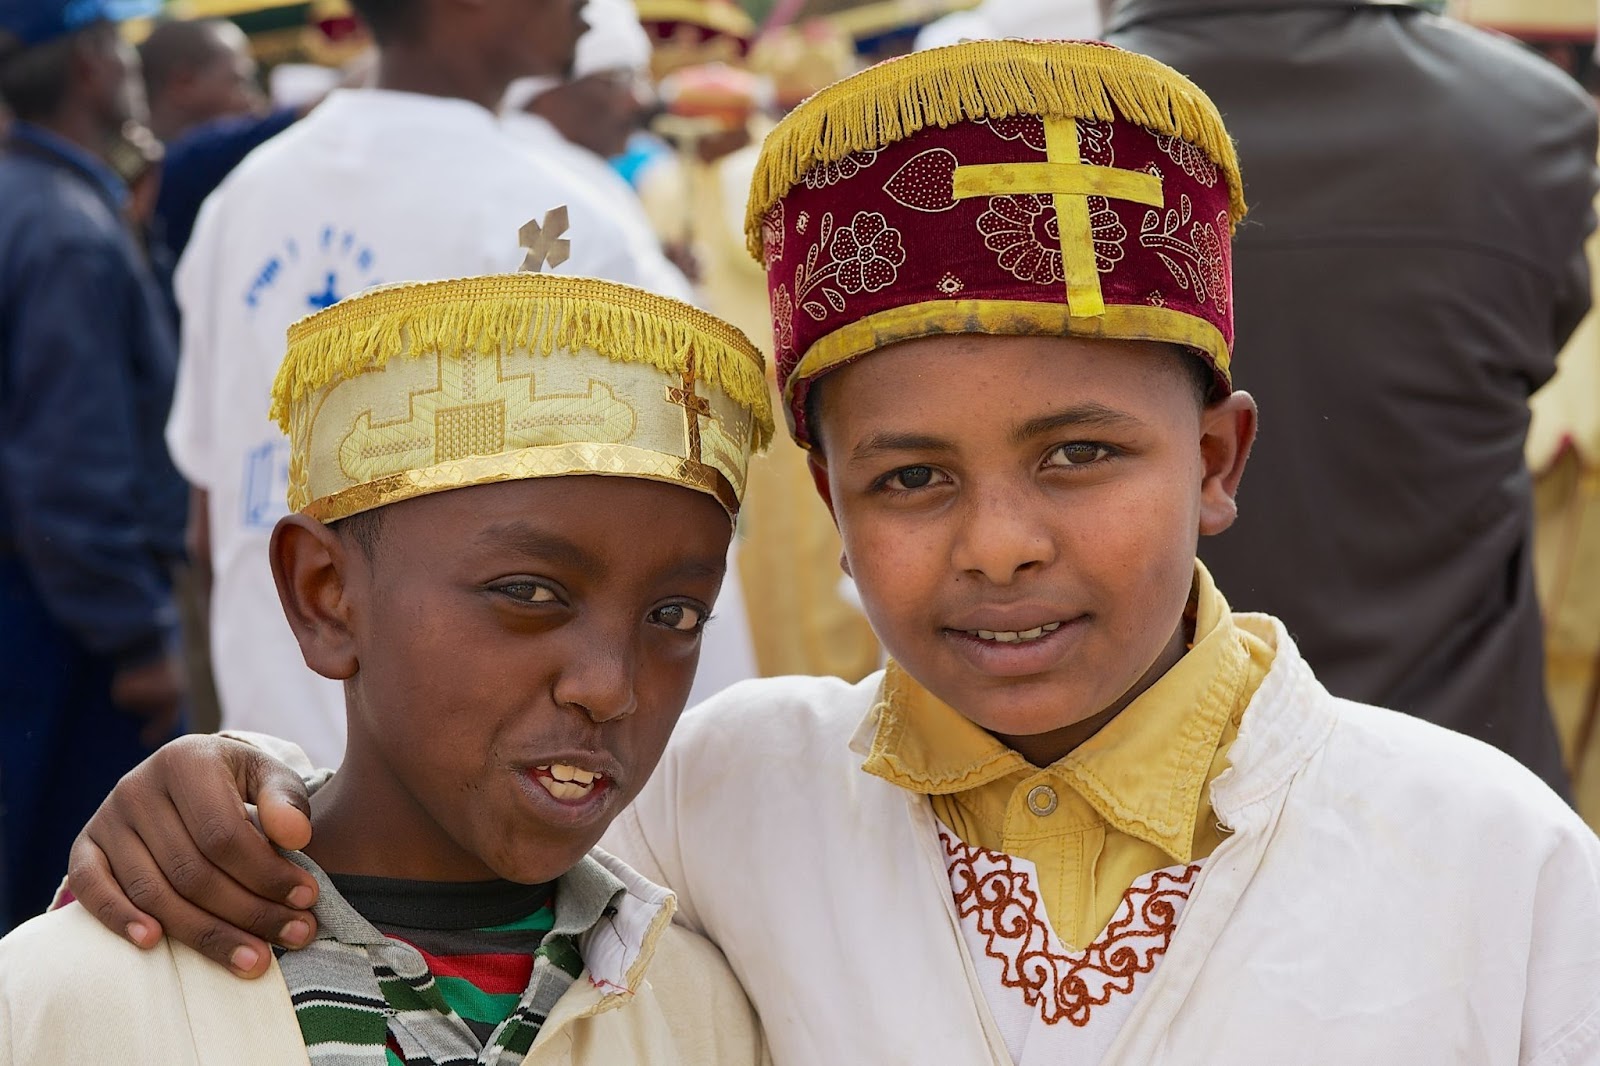 Ethiopian boys wearing traditional costumes during Timkat Christian Orthodox religious celebrations